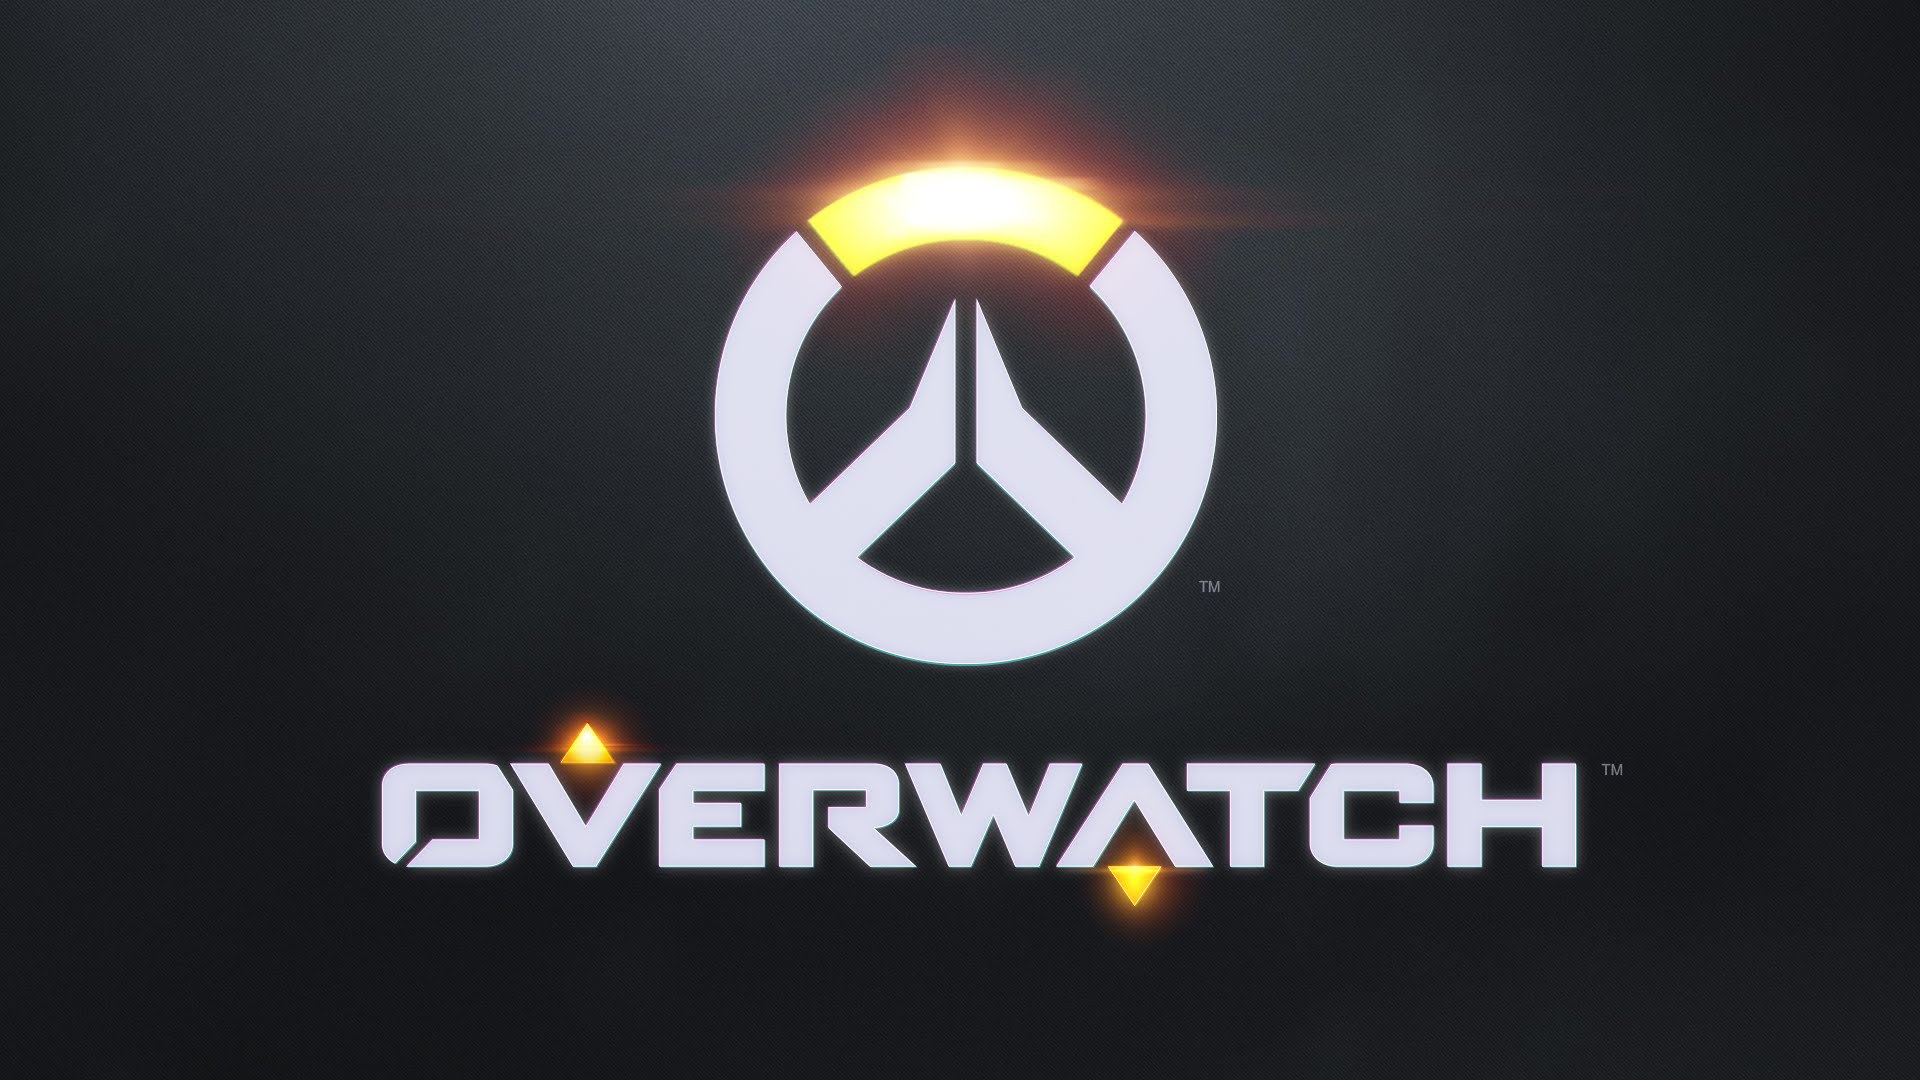 Overwatch Wallpaper Image Photos Pictures Background